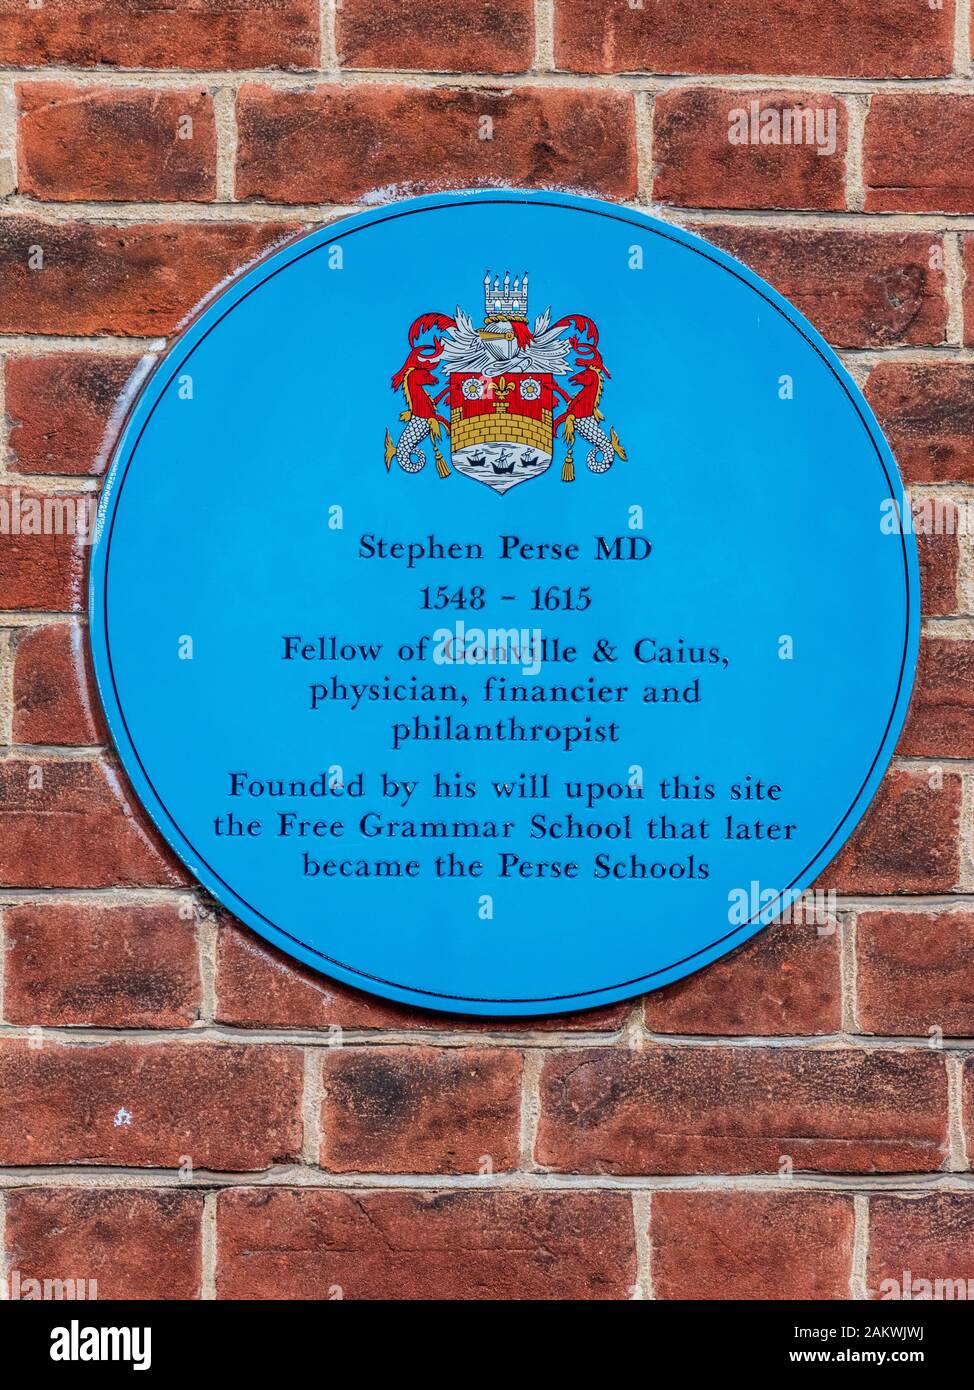 Stephen Perse MD Memorial Plaque Cambridge - Dr Perse, 1548-1615, founded the Free Grammar School in Free School Lane, later the Perse Schools. Stock Photo